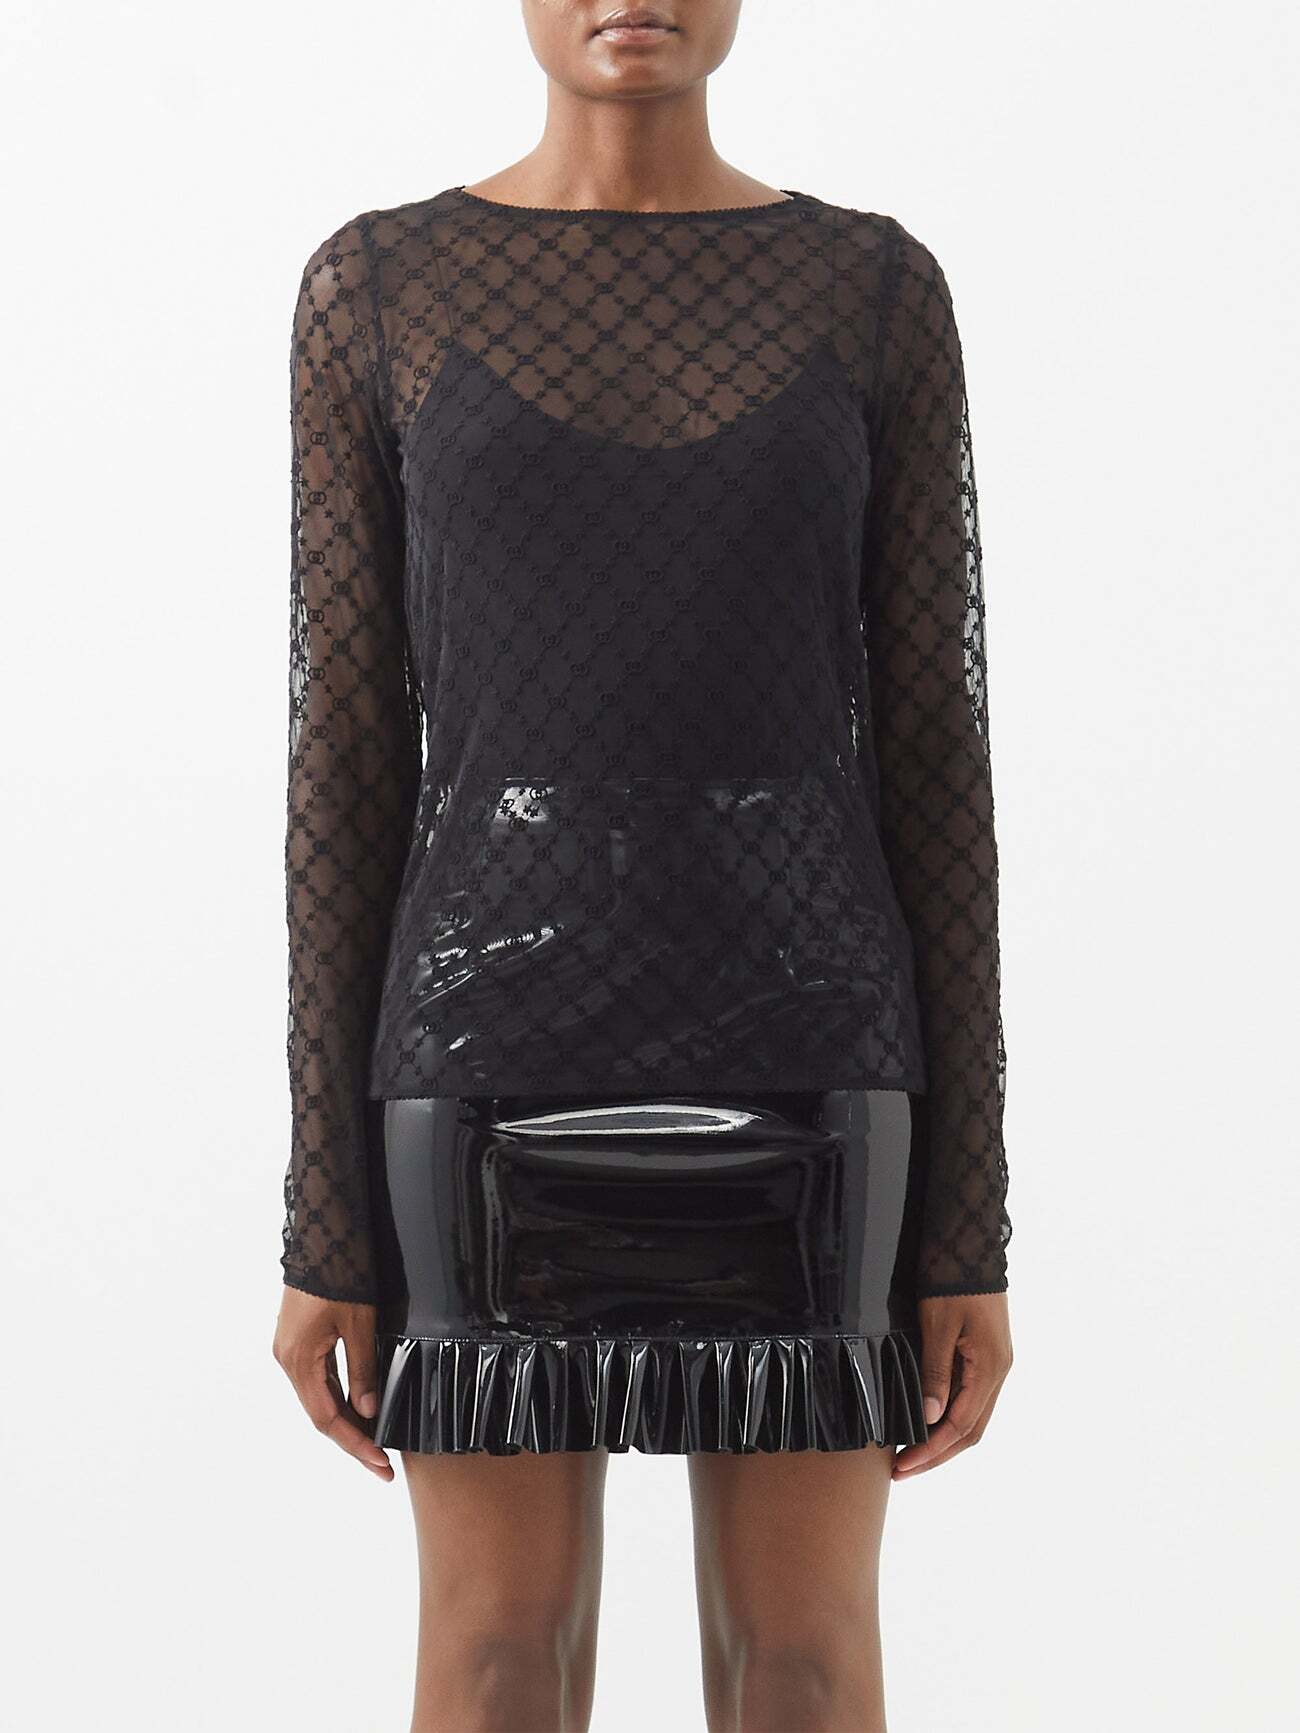 Gucci - GG-embroidered Tulle Top - Womens - Black